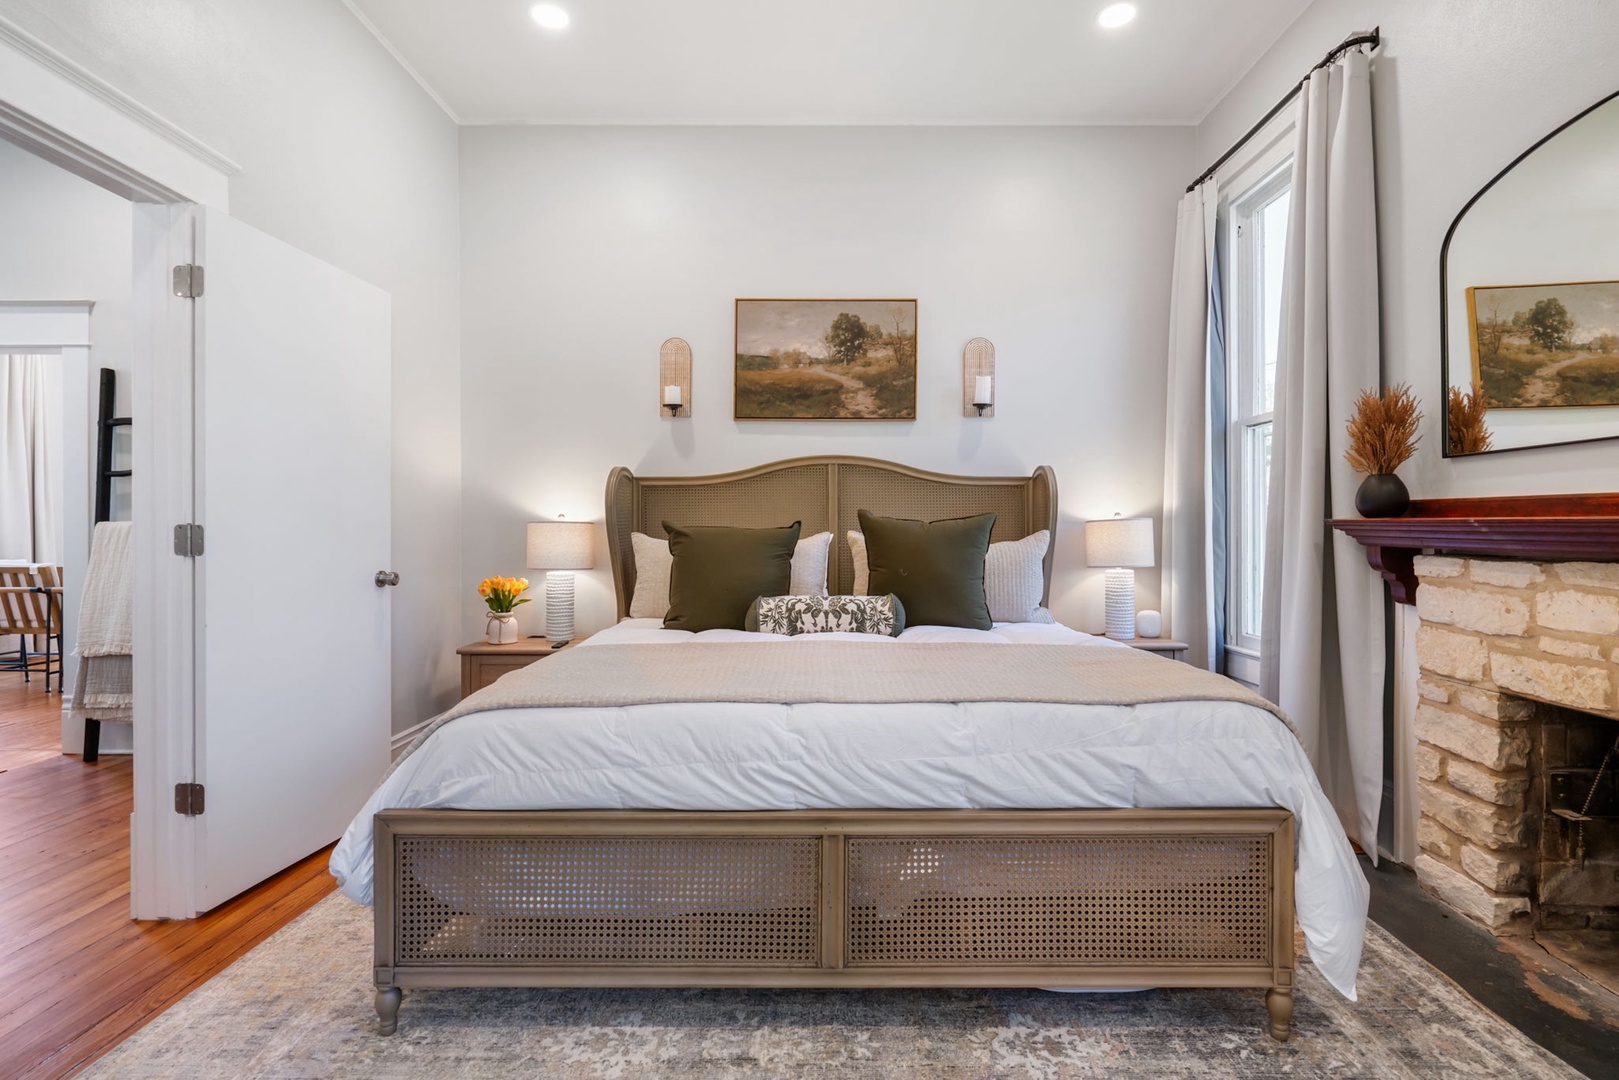 The 1st of 3 chic bedrooms, offering a plush king-sized bed & Smart TV